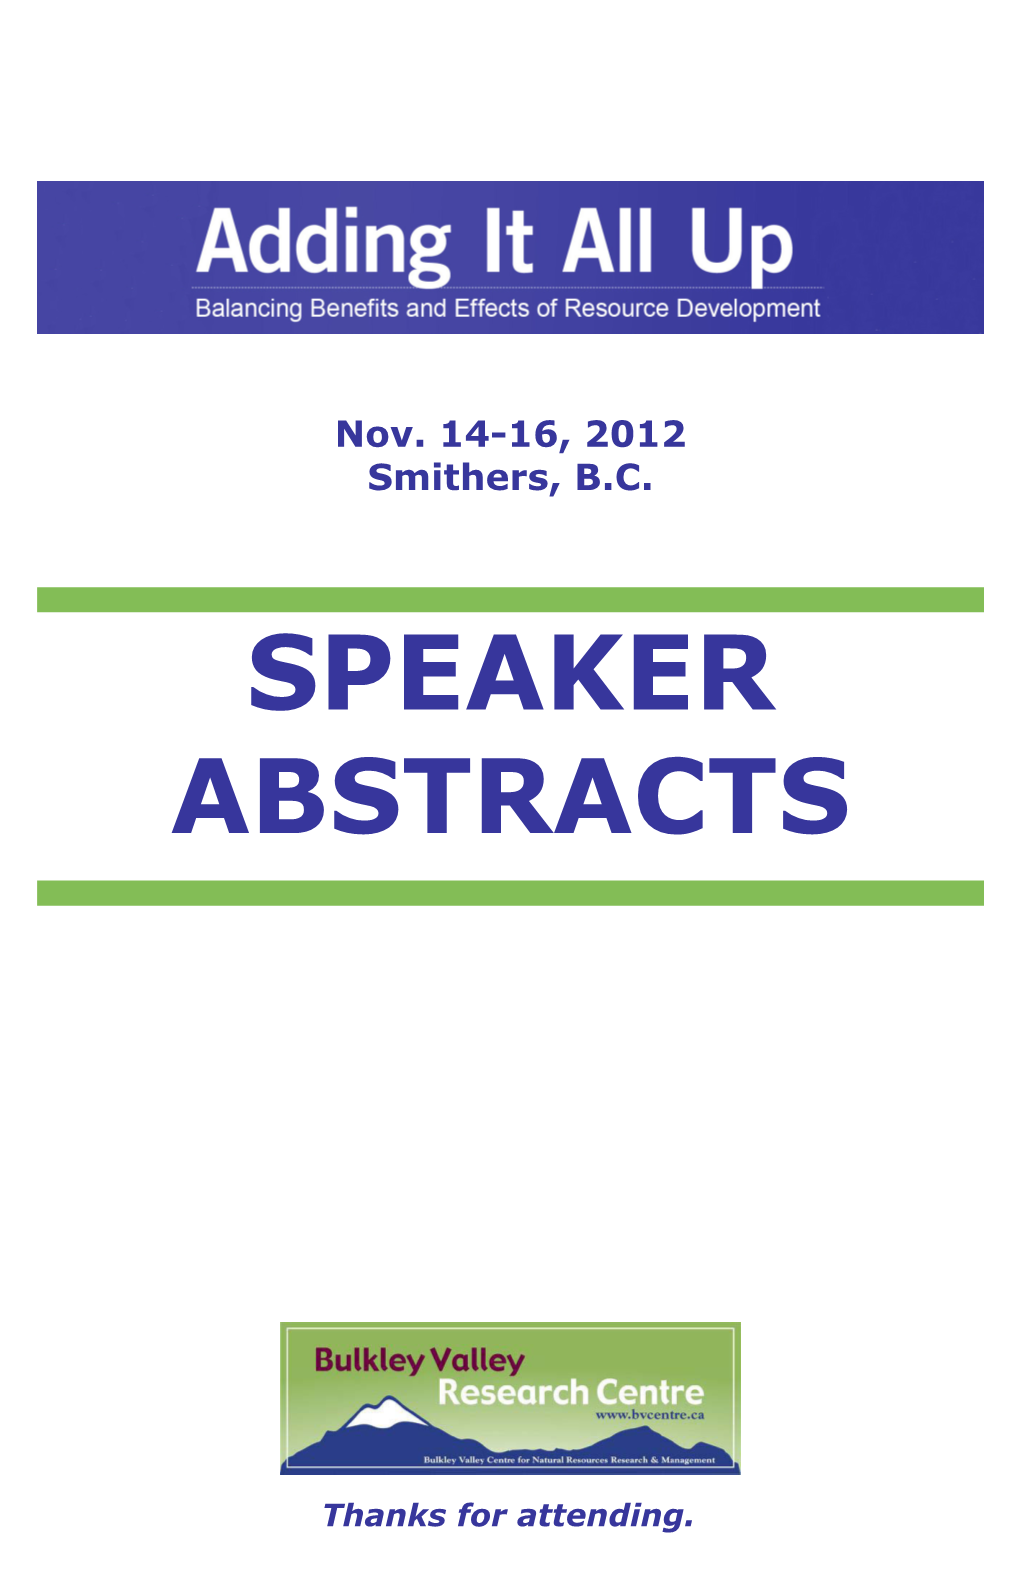 Speaker Abstracts